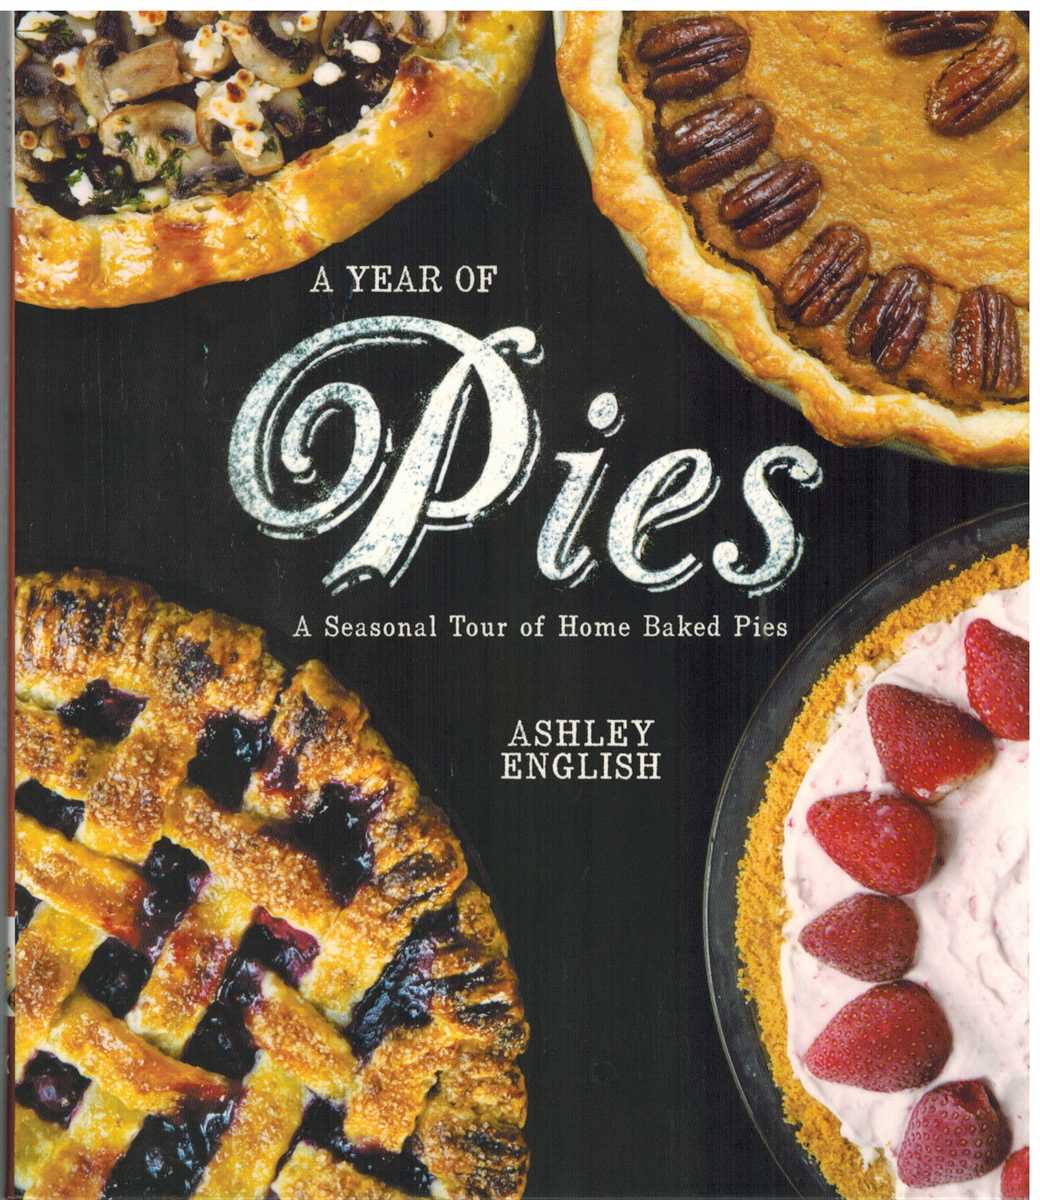 English, Ashley - A YEAR OF PIES A Seasonal Tour of Home Baked Pies